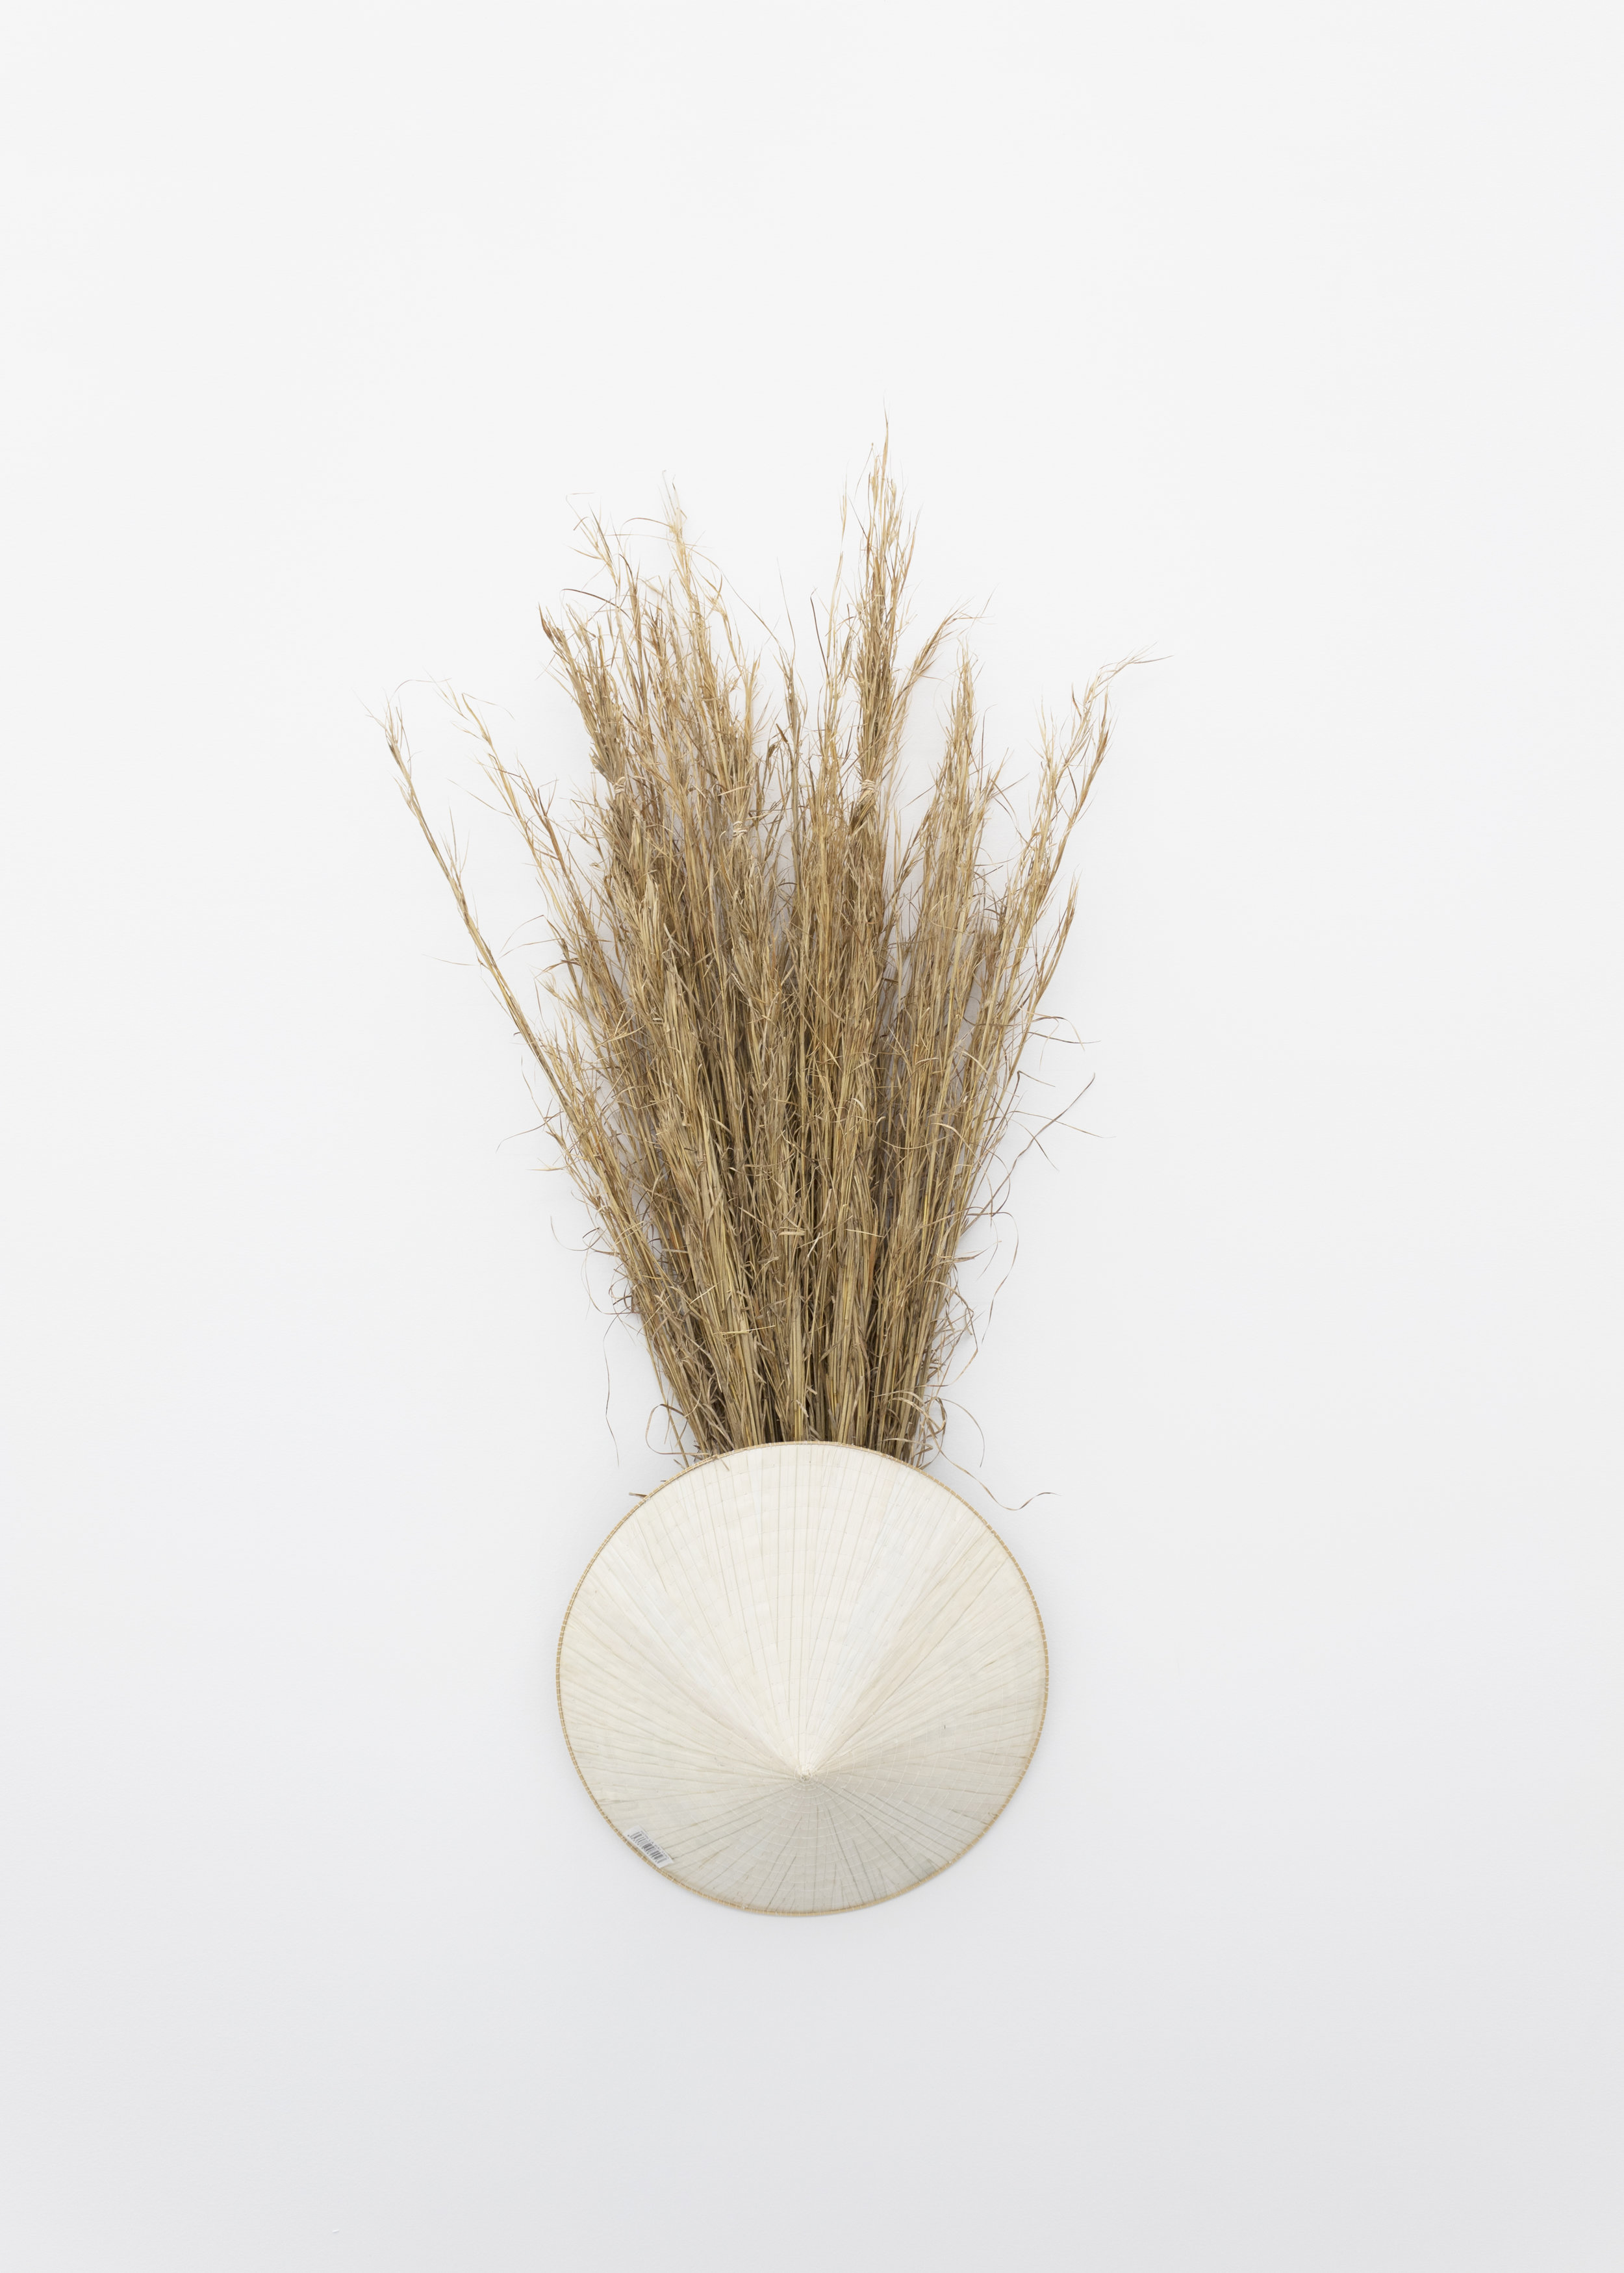  Millian Giang Lien Pham,  Preforge: 9 Stages (Eight) , 2019. Grass, conical hat 